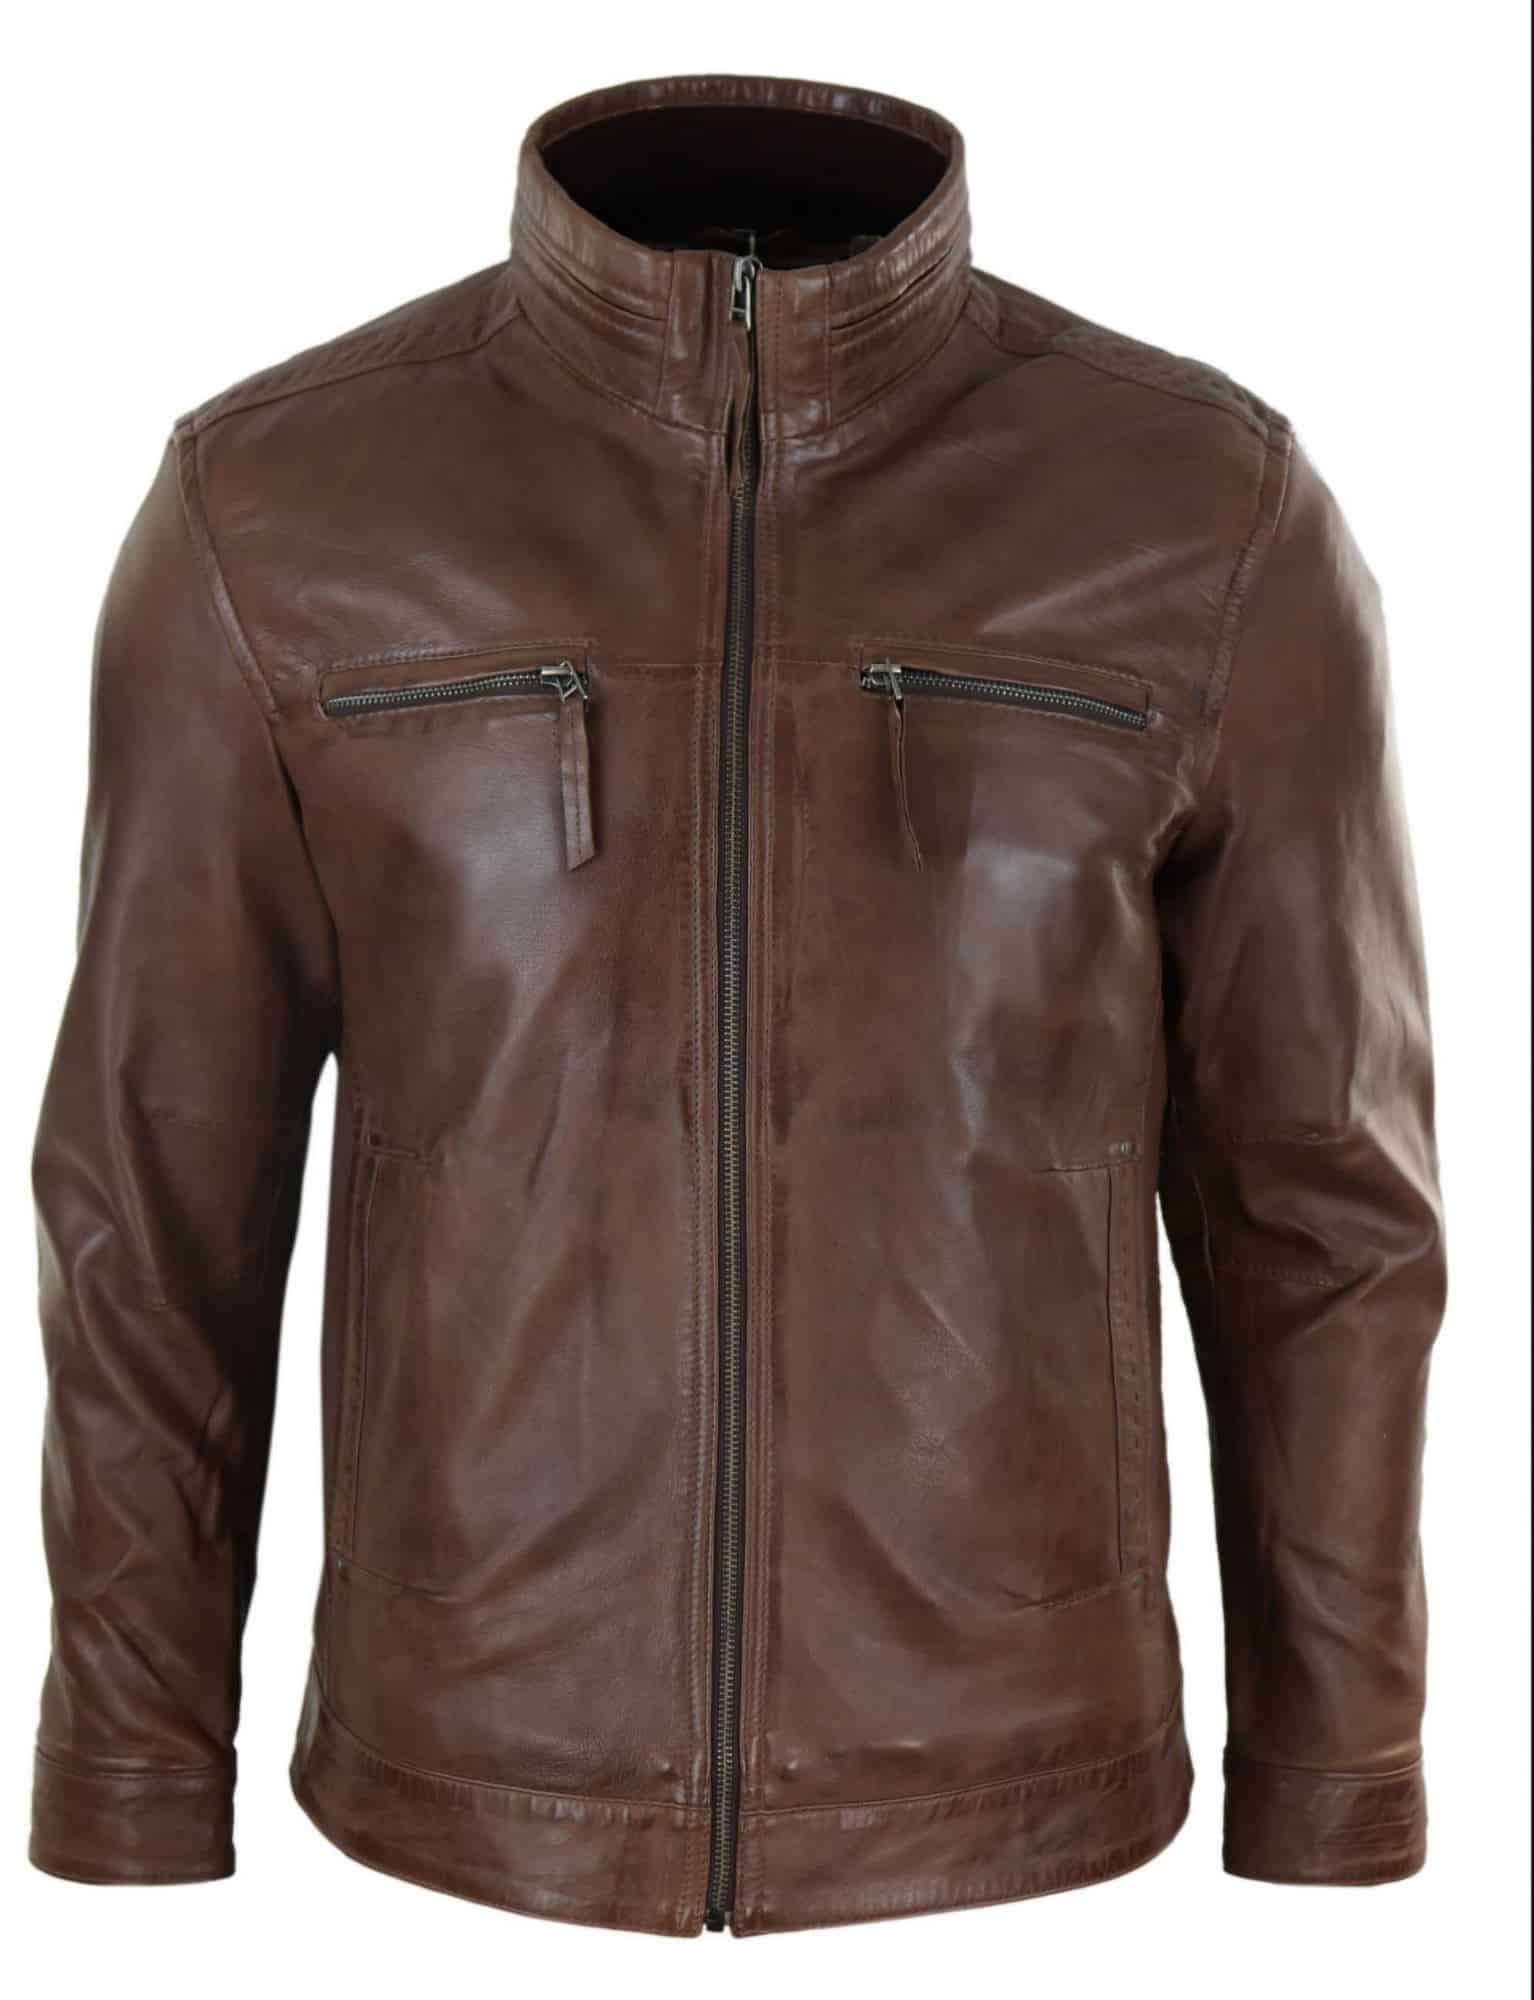 Real Leather Mens High Collar Jacket - Brown